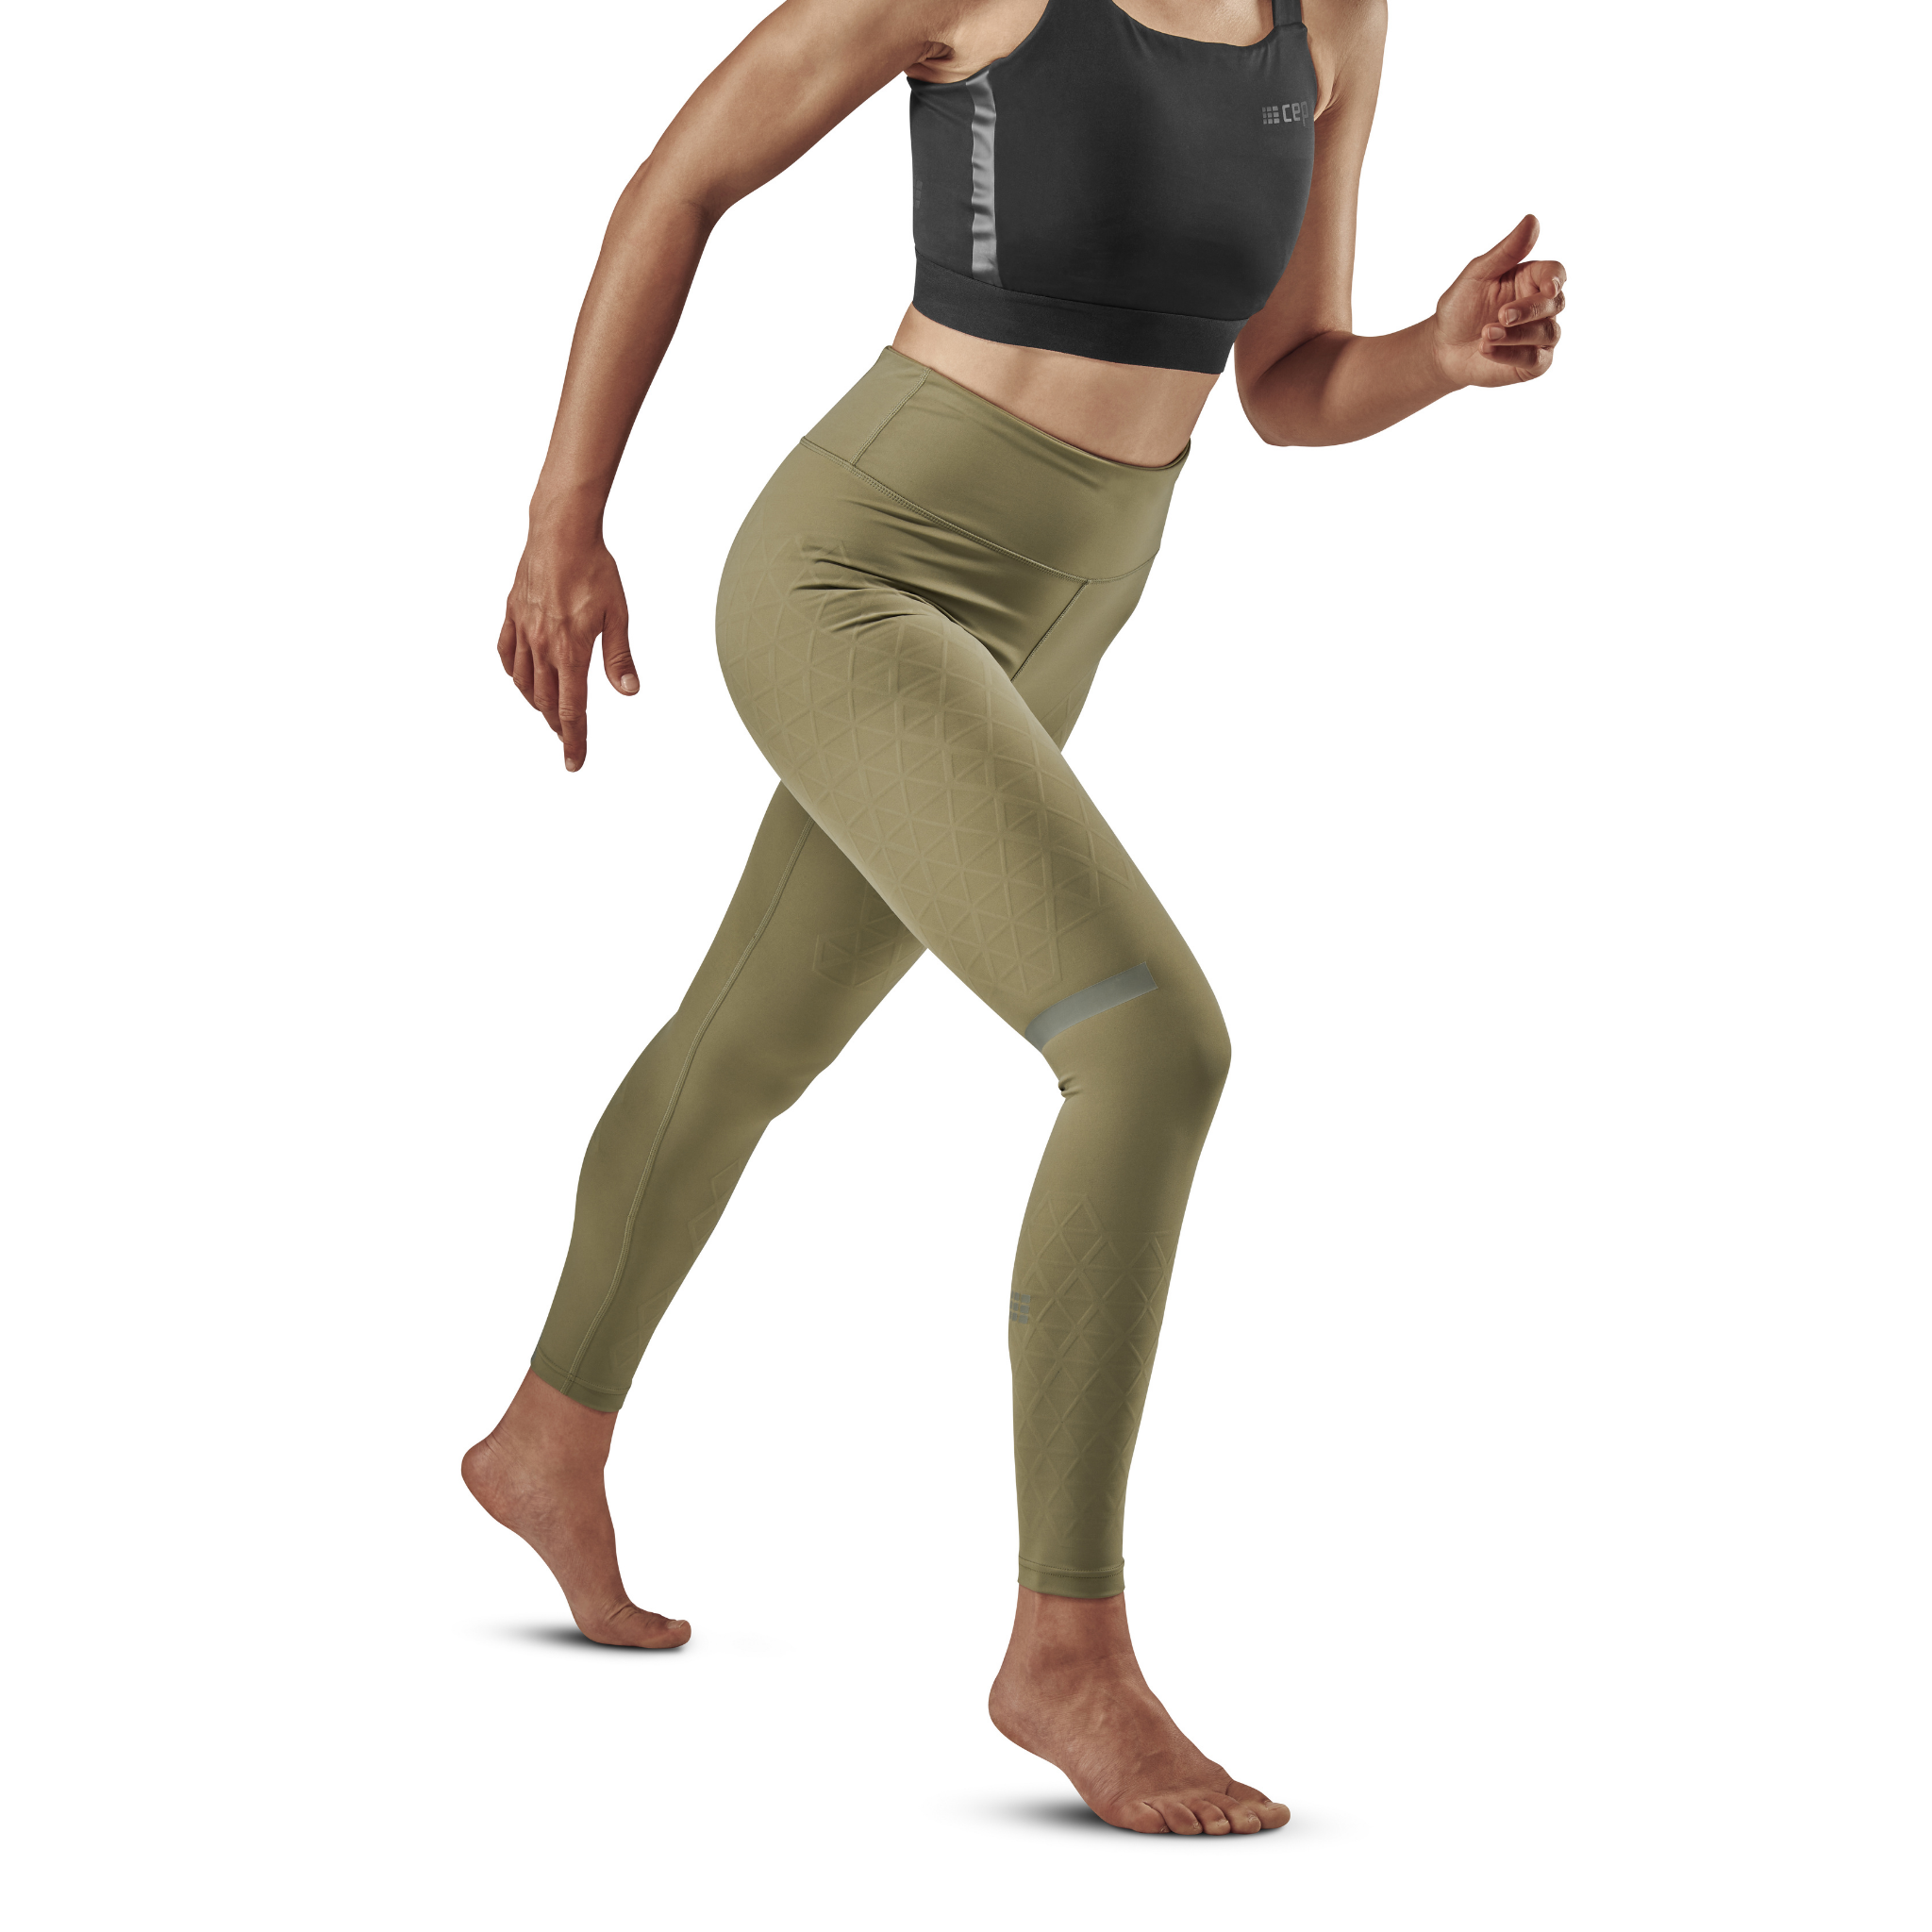 CEP Compression Running Shorts for Women - Women's Active Run